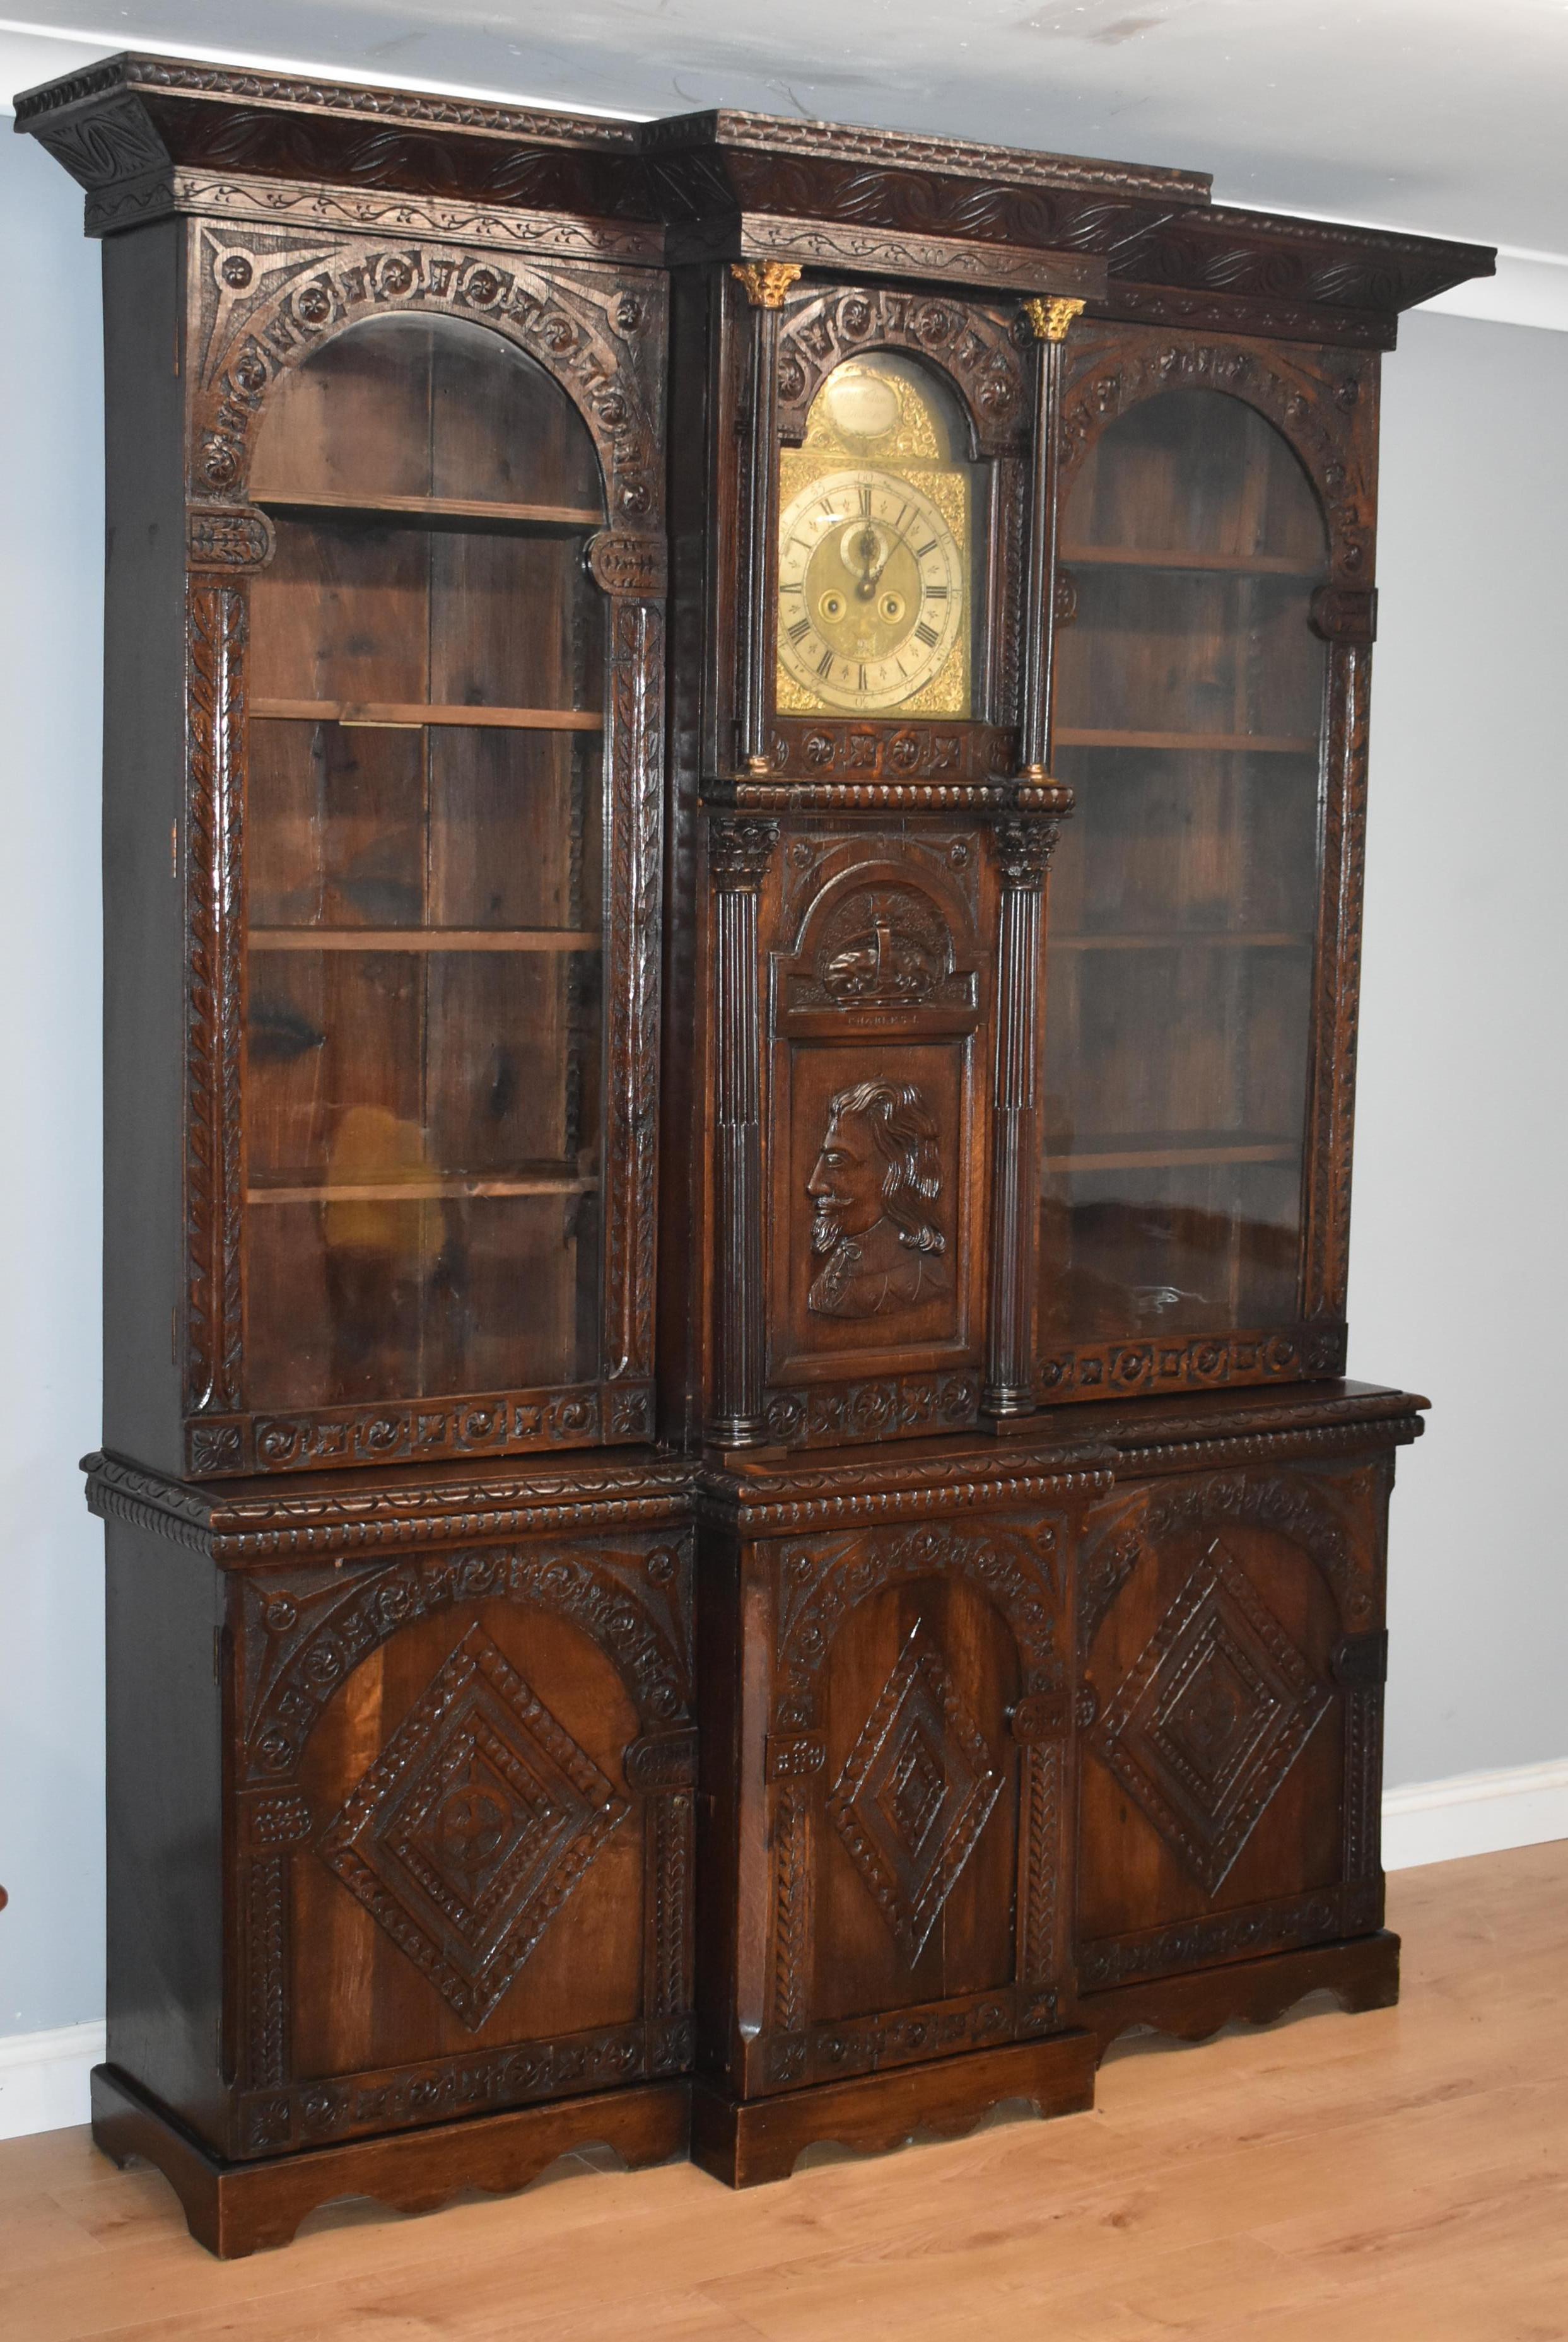 Victorian Carved Oak Cabinet or Bookcase with Phil Walton Devizes Clock 15